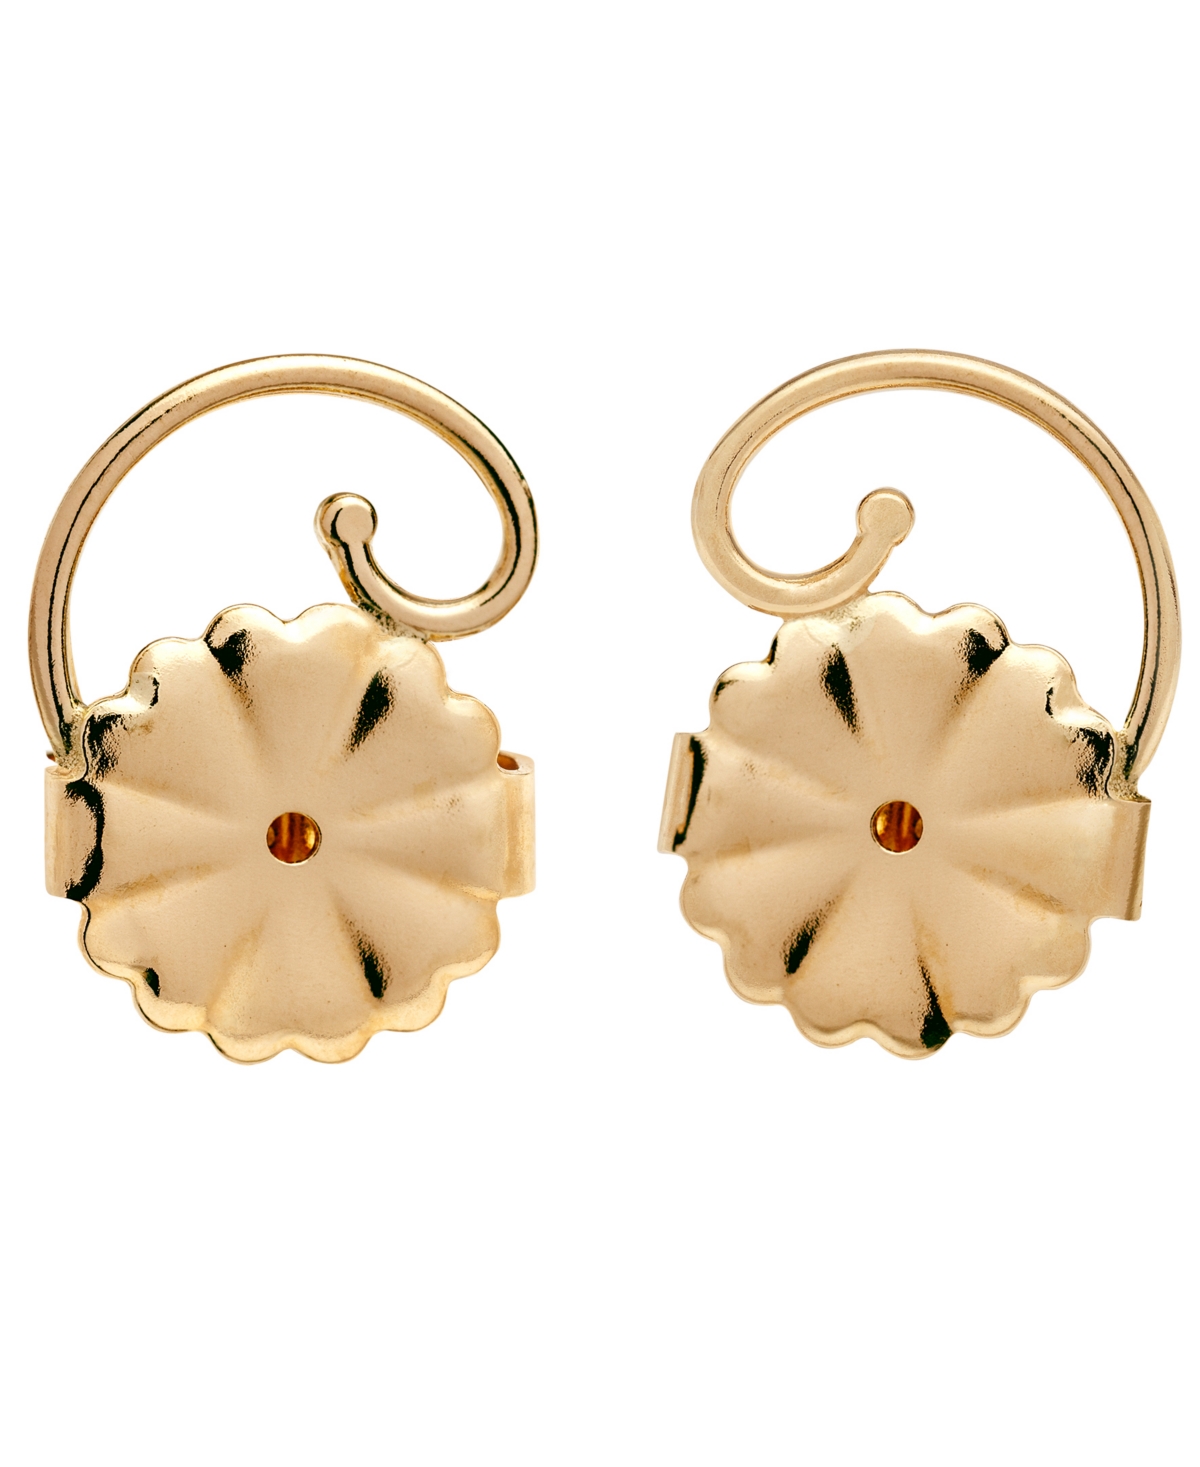 Levears Earring Backs in 14k Gold over Sterling Silver & Reviews - Jewelry  & Watches - Macy's